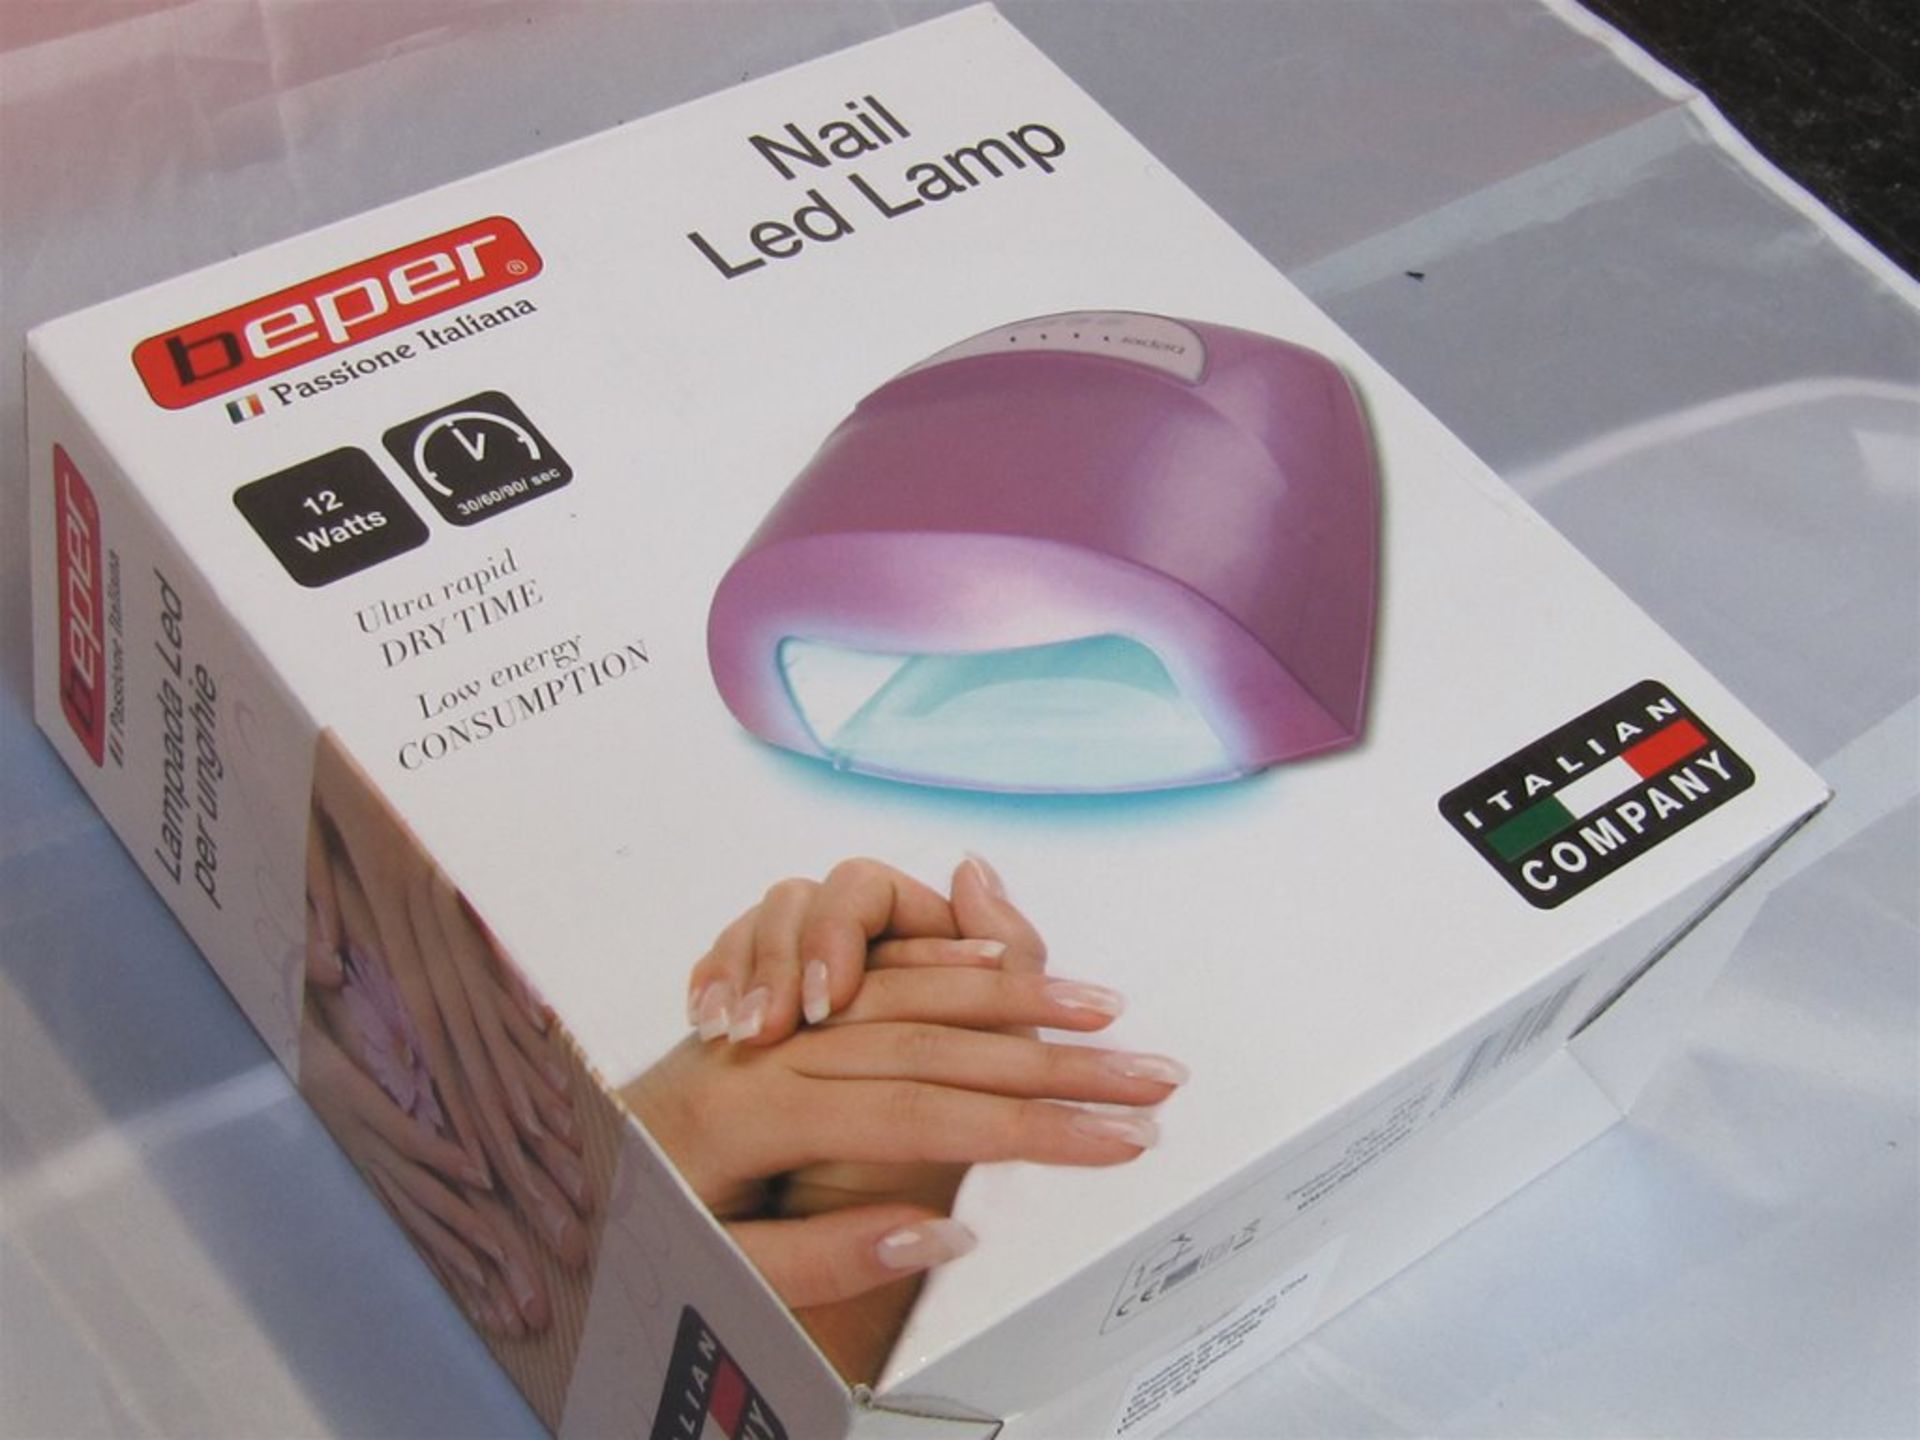 160) Beper LED Nail Lamp. 12w Rapid Dry Time. No vat on Hammer.